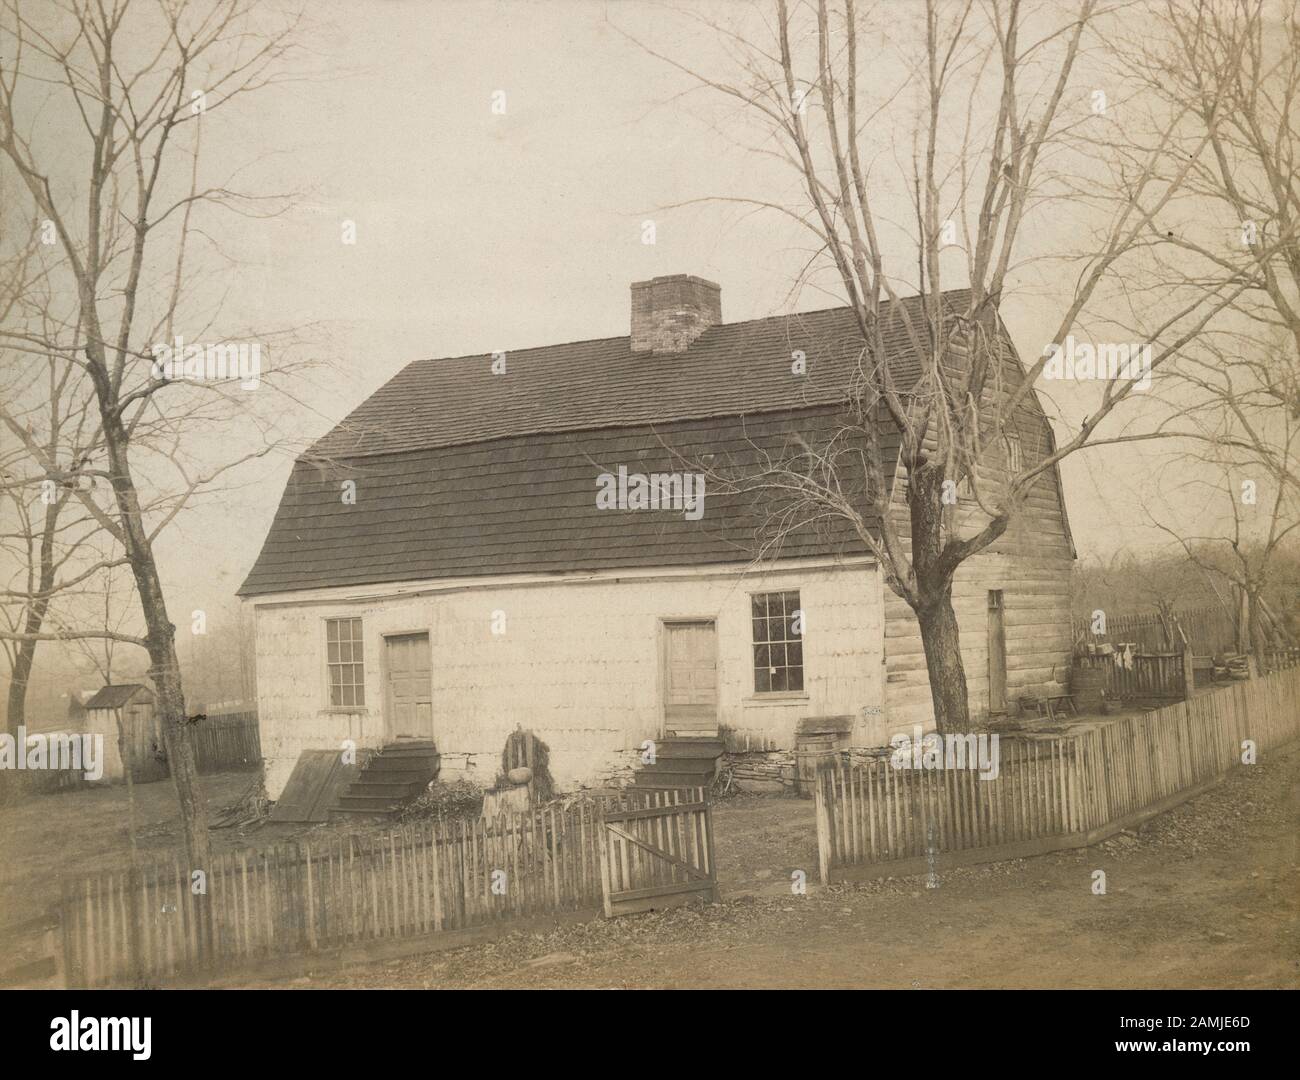 Antique c1890 photograph, the Johnson Ferry House in Titusville, New Jersey. It was used by General Washington and other officers at the time of the Christmas night crossing of the Delaware in 1776. SOURCE: ORIGINAL PHOTOGRAPH Stock Photo